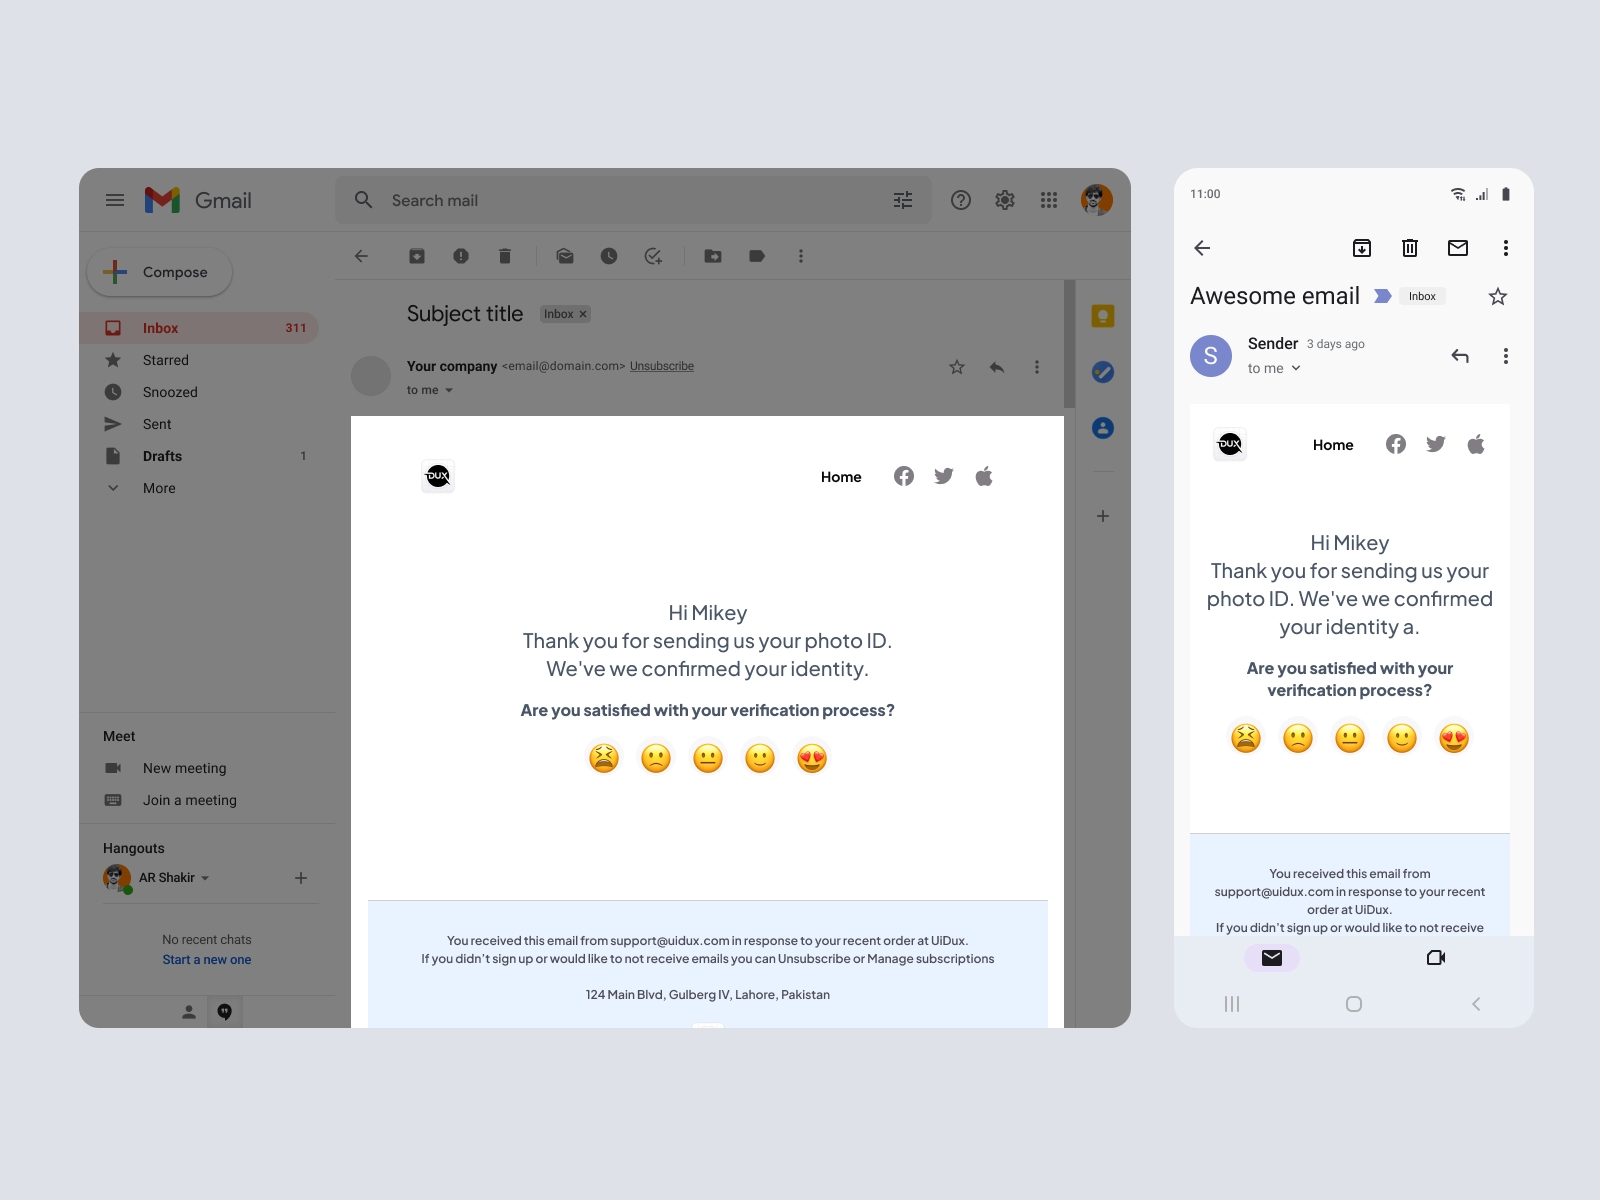 Email Design Templates - Survey/Feedback Email Design for Figma and Adobe XD - screen 1